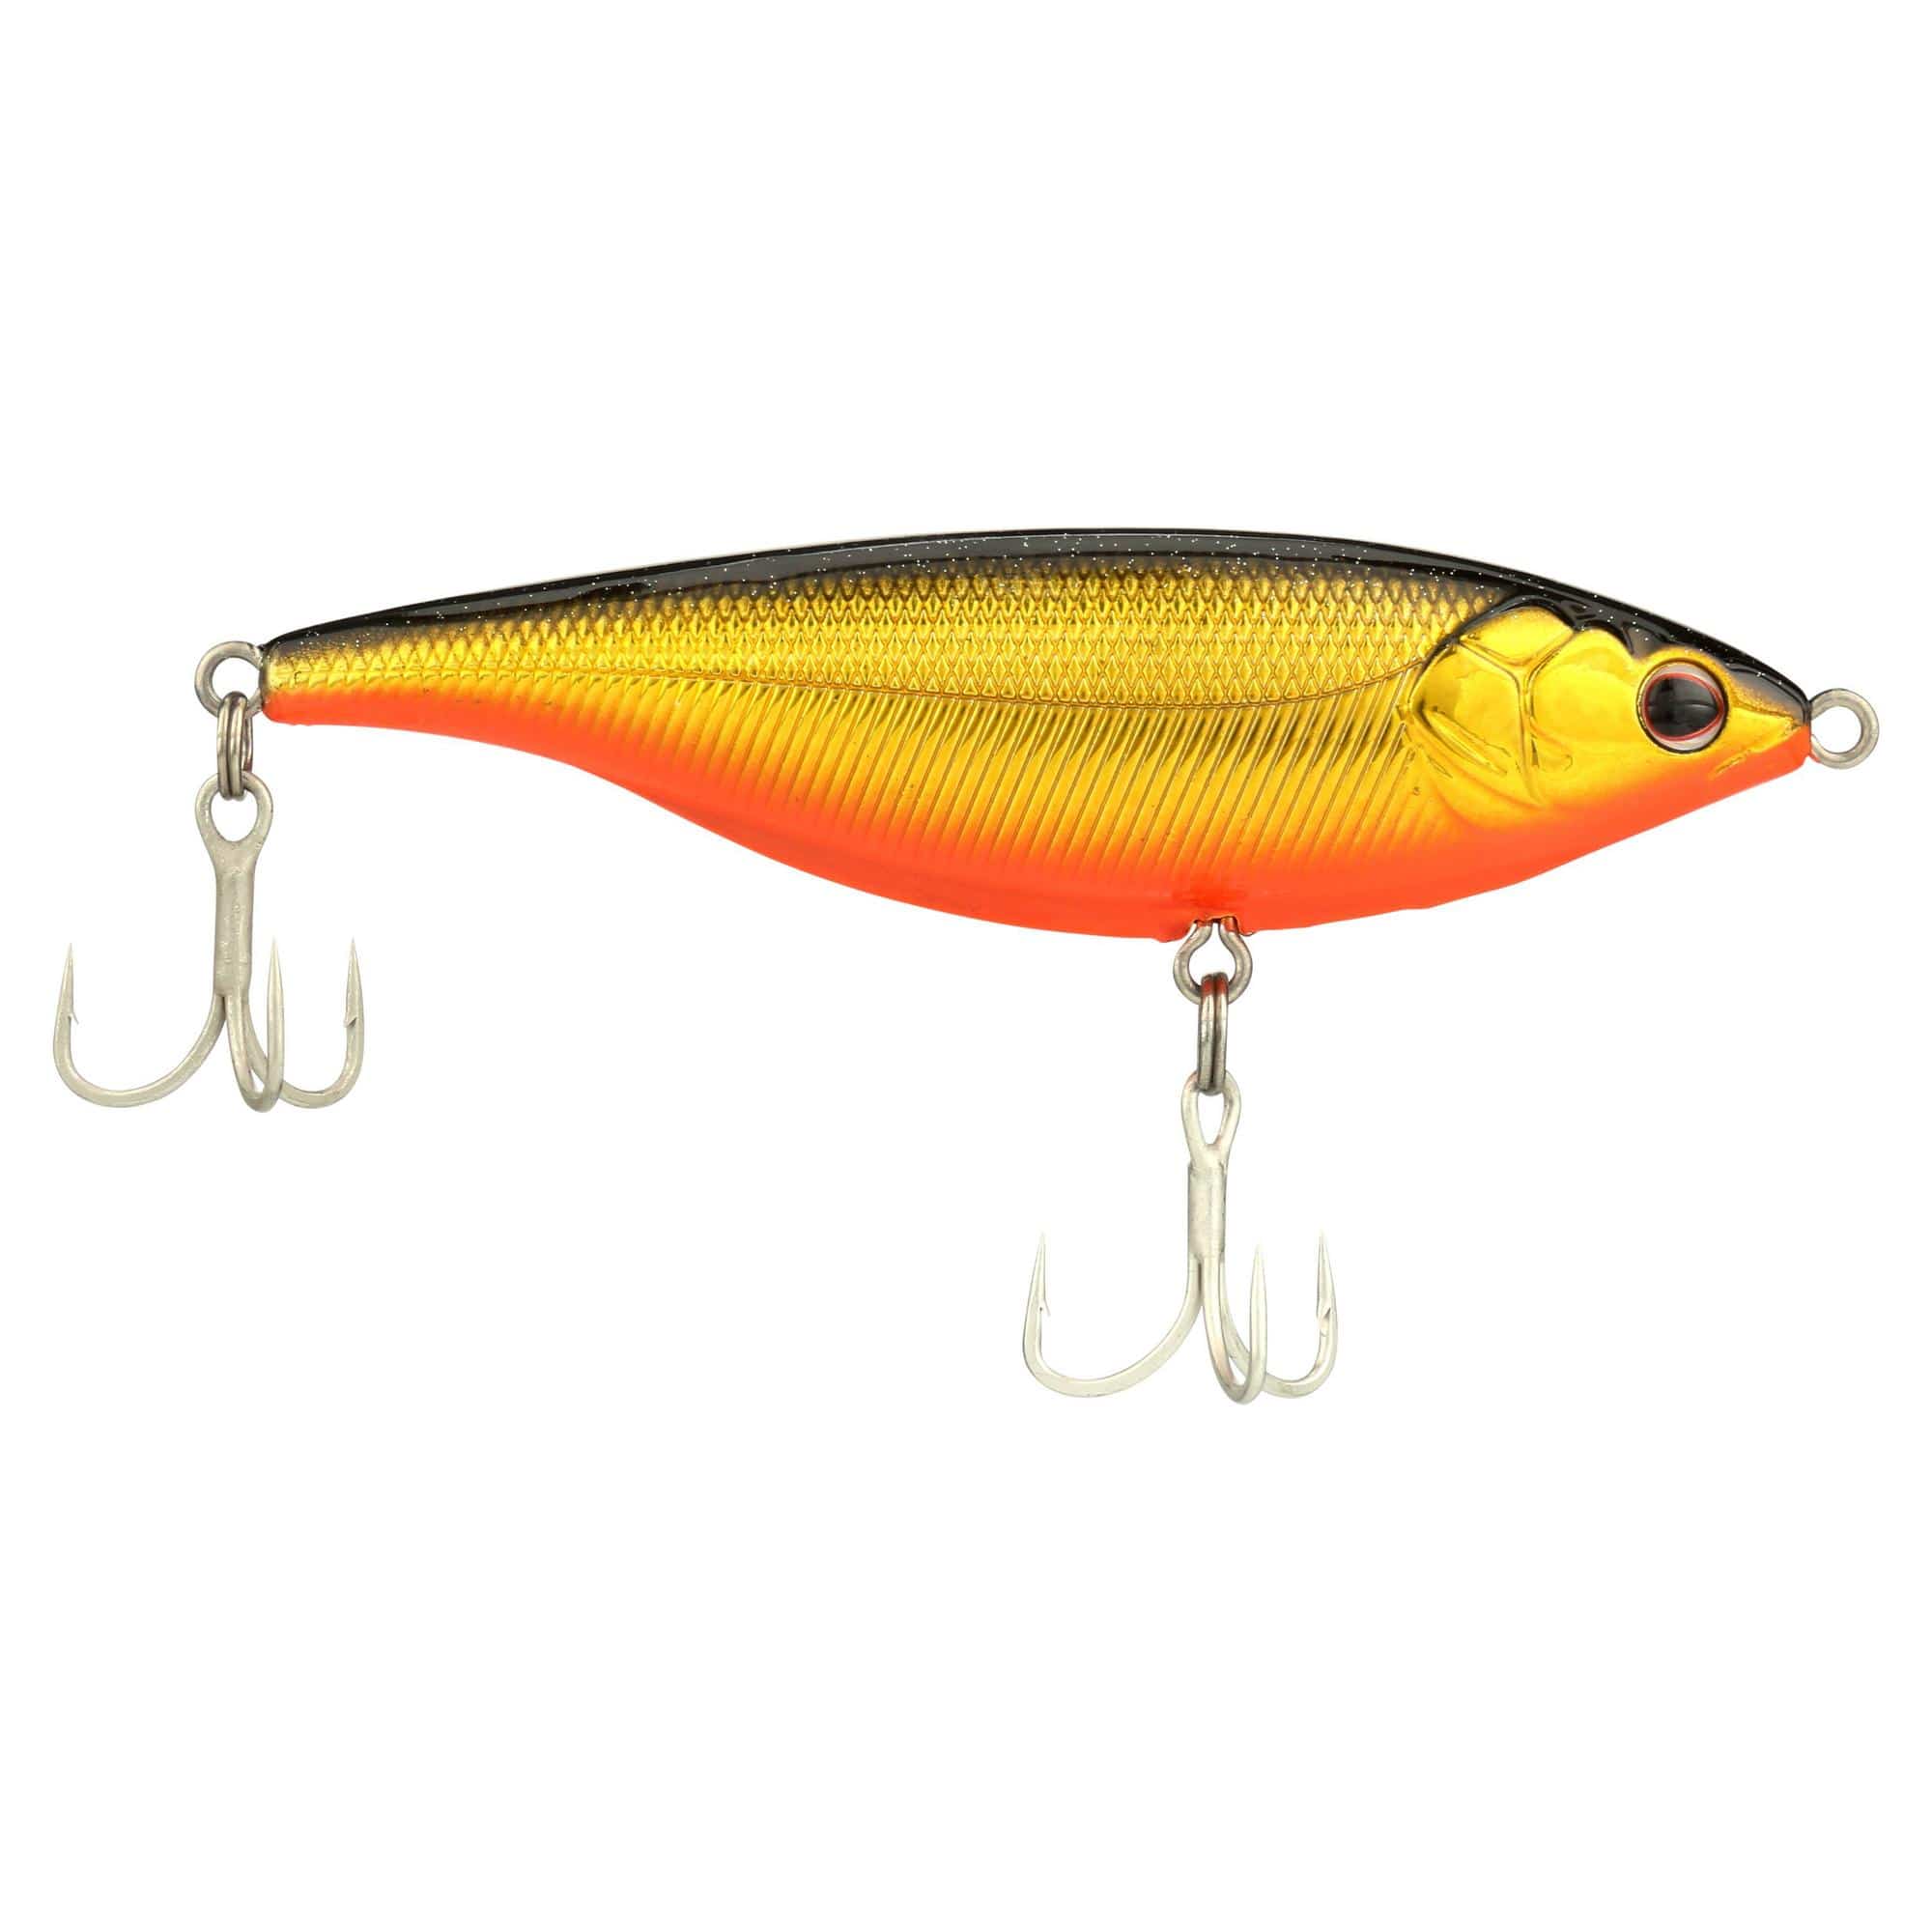 All Tagged plastic-glide-baits - The Saltwater Edge